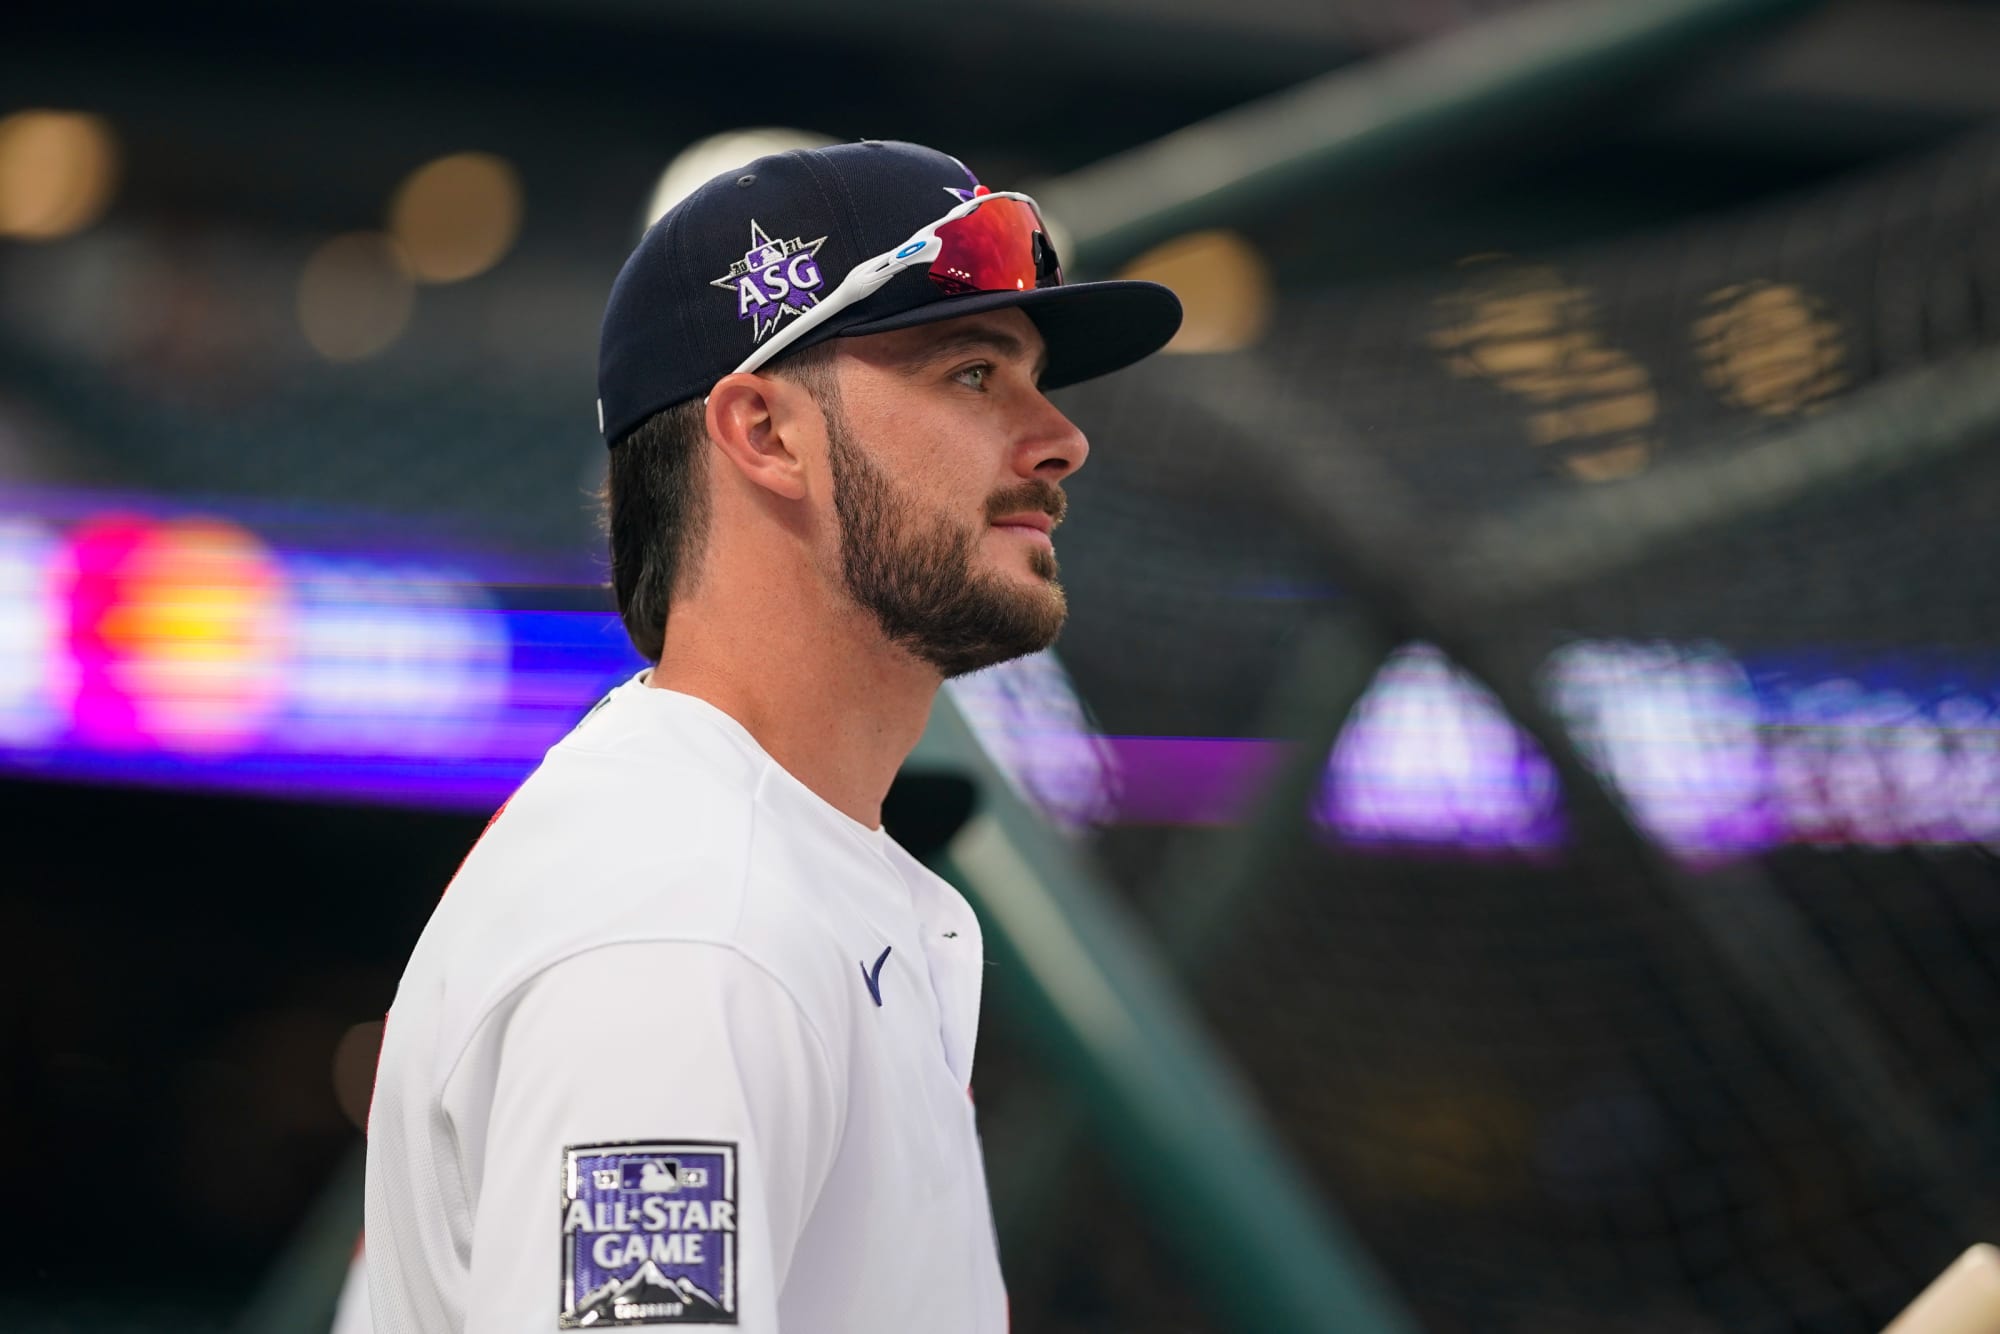 Kris Bryant named to All-Star team as reserve